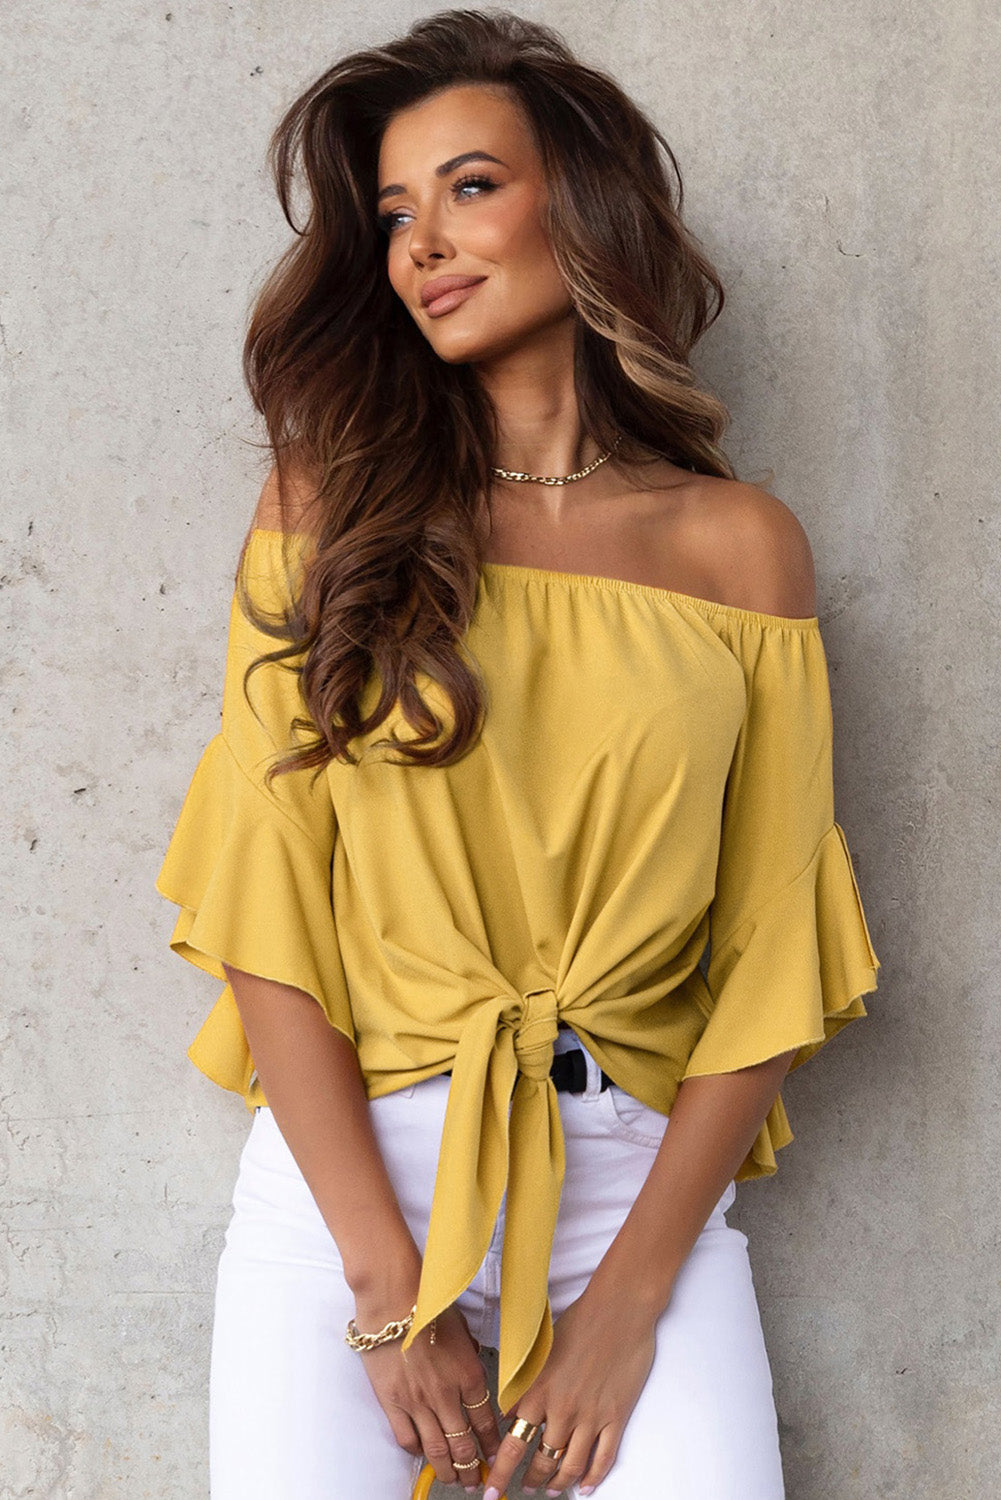 Off-Shoulder Tie Hem Blouse - Yellow / S - Women’s Clothing & Accessories - Shirts & Tops - 7 - 2024